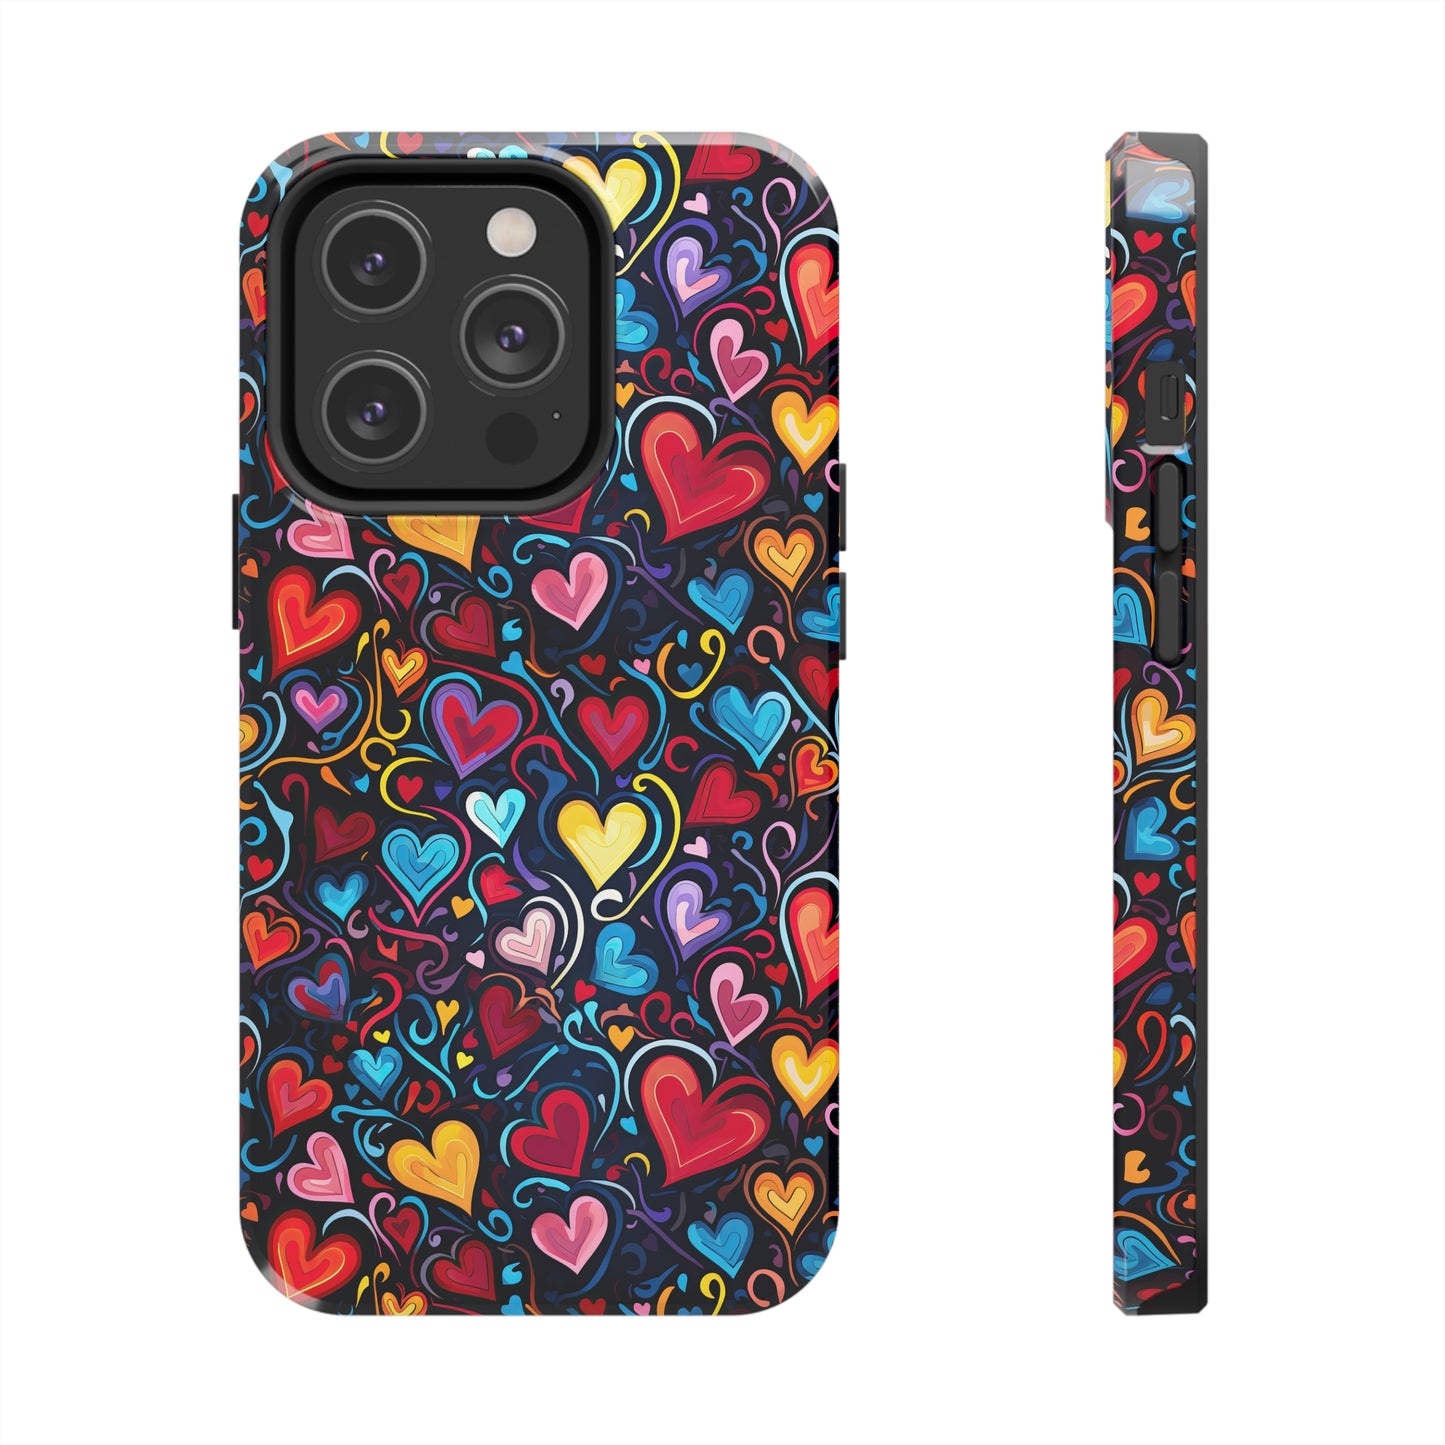 Whimsical Colorful Heart Design Iphone Tough Phone Case